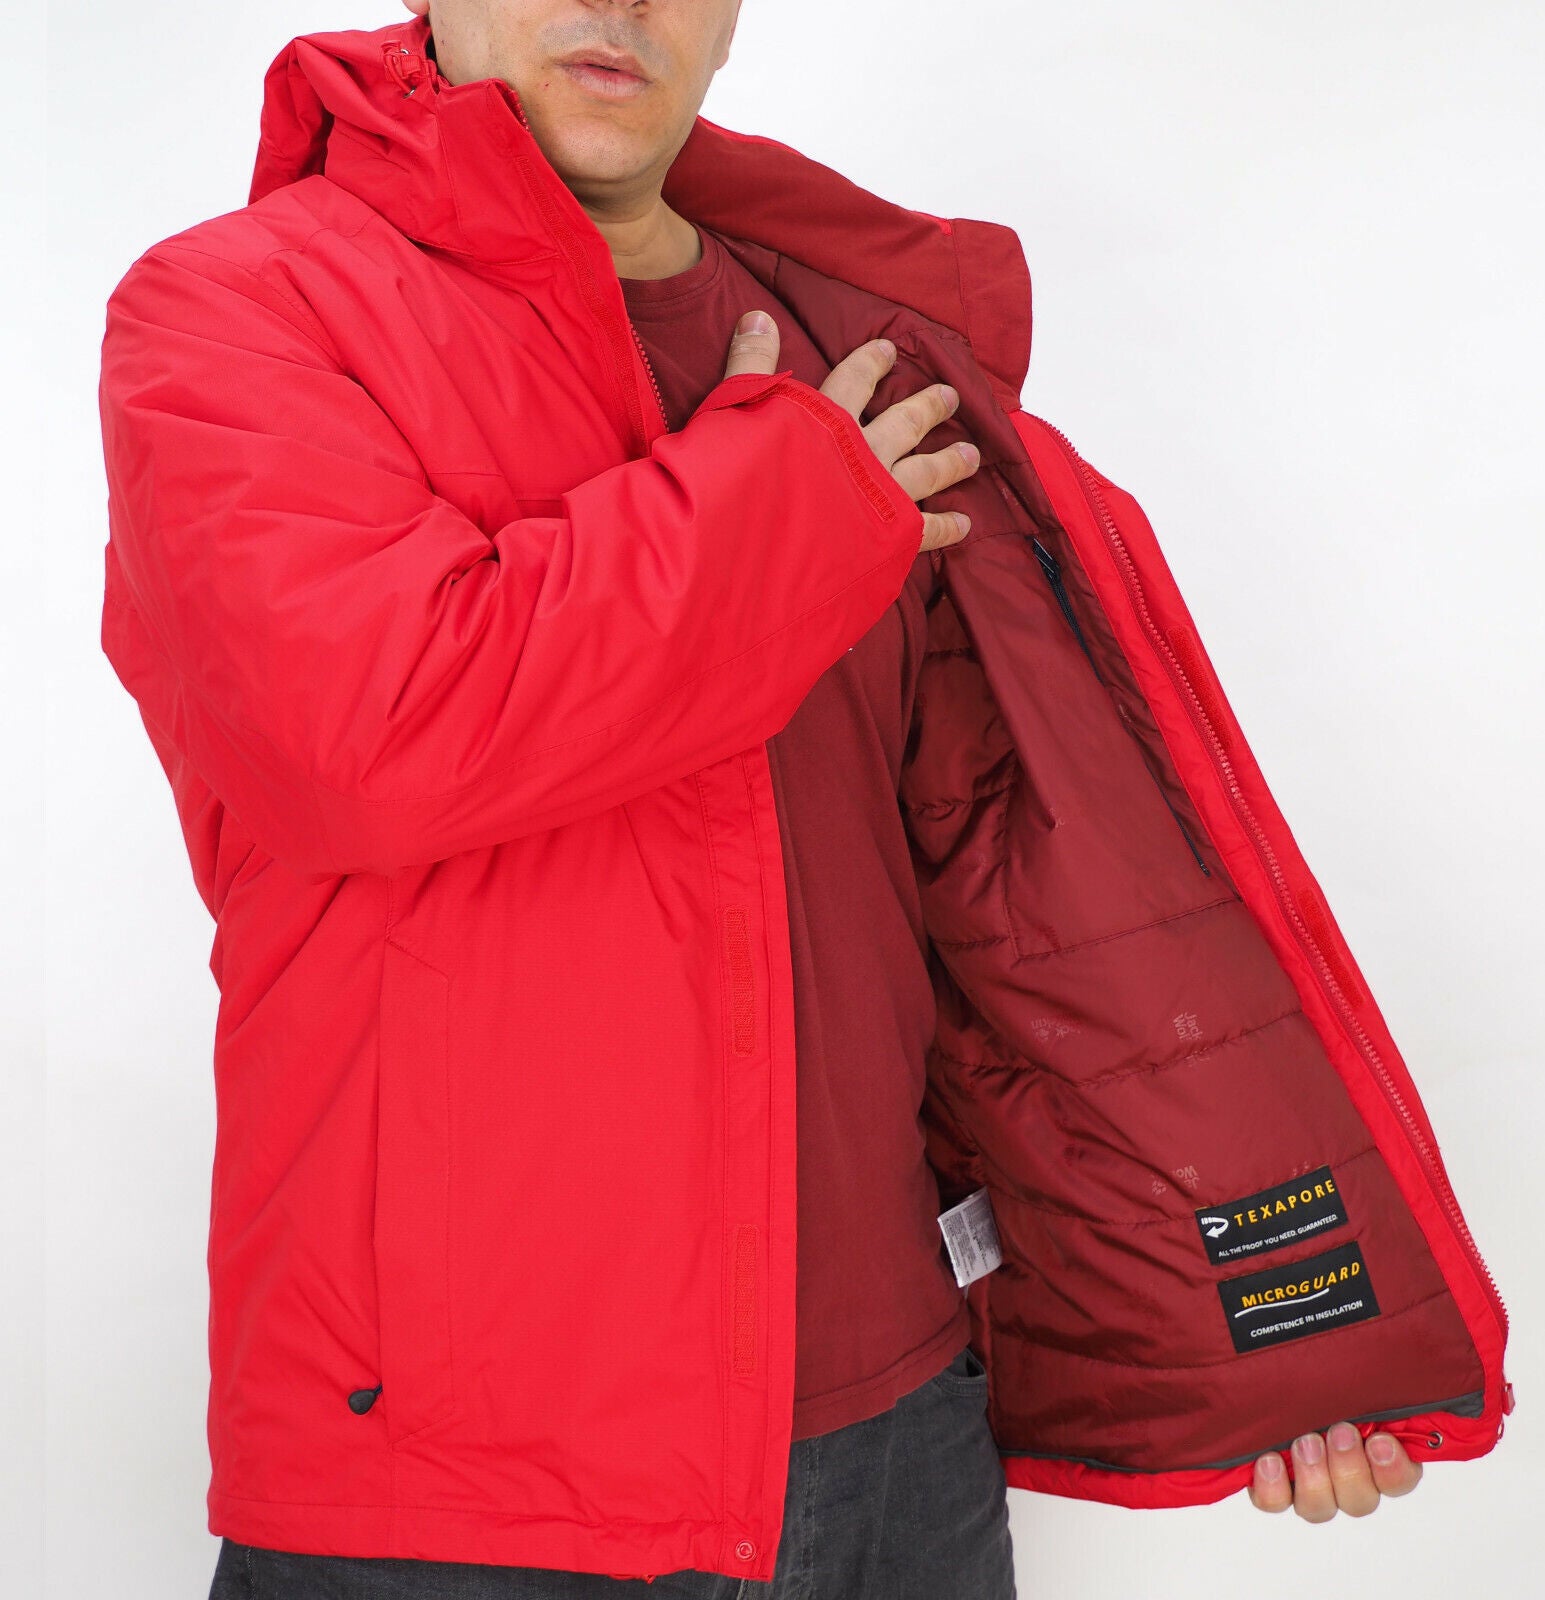 Mens Jack Wolfskin Rep Glo 1106931 Red Fire Zip Up Warm Hooded Hiking Jacket